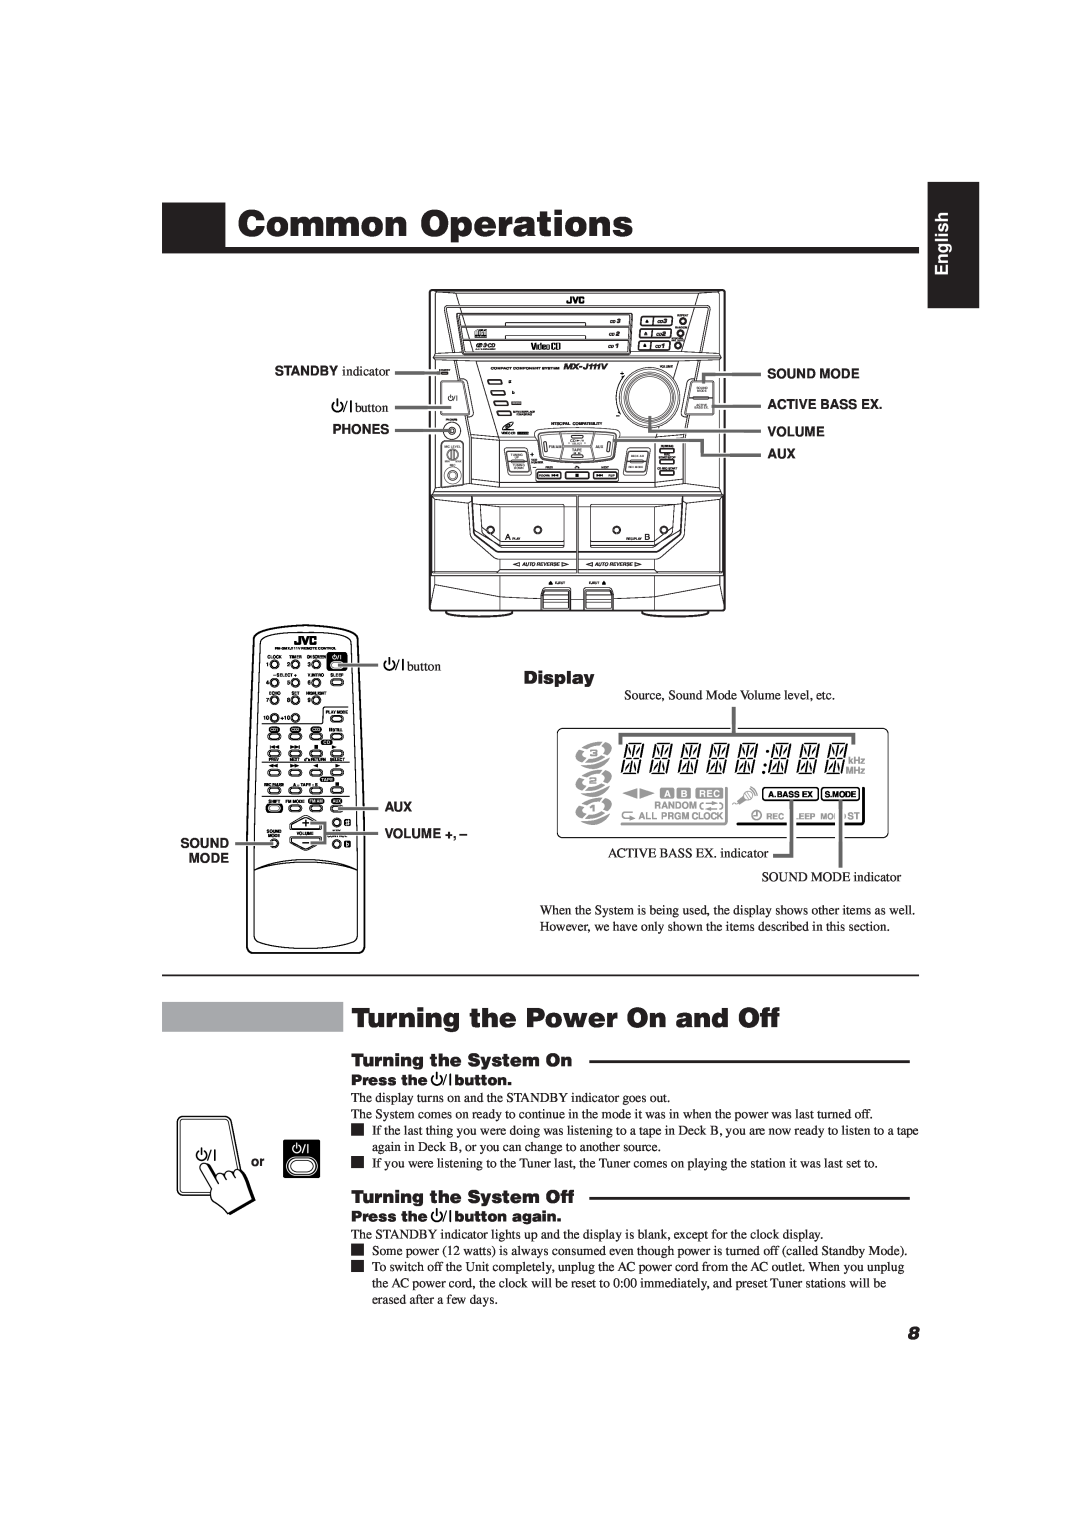 JVC MX-J111V manual Common Operations, Turning the Power On and Off, Display, Turning the System On, Turning the System Off 